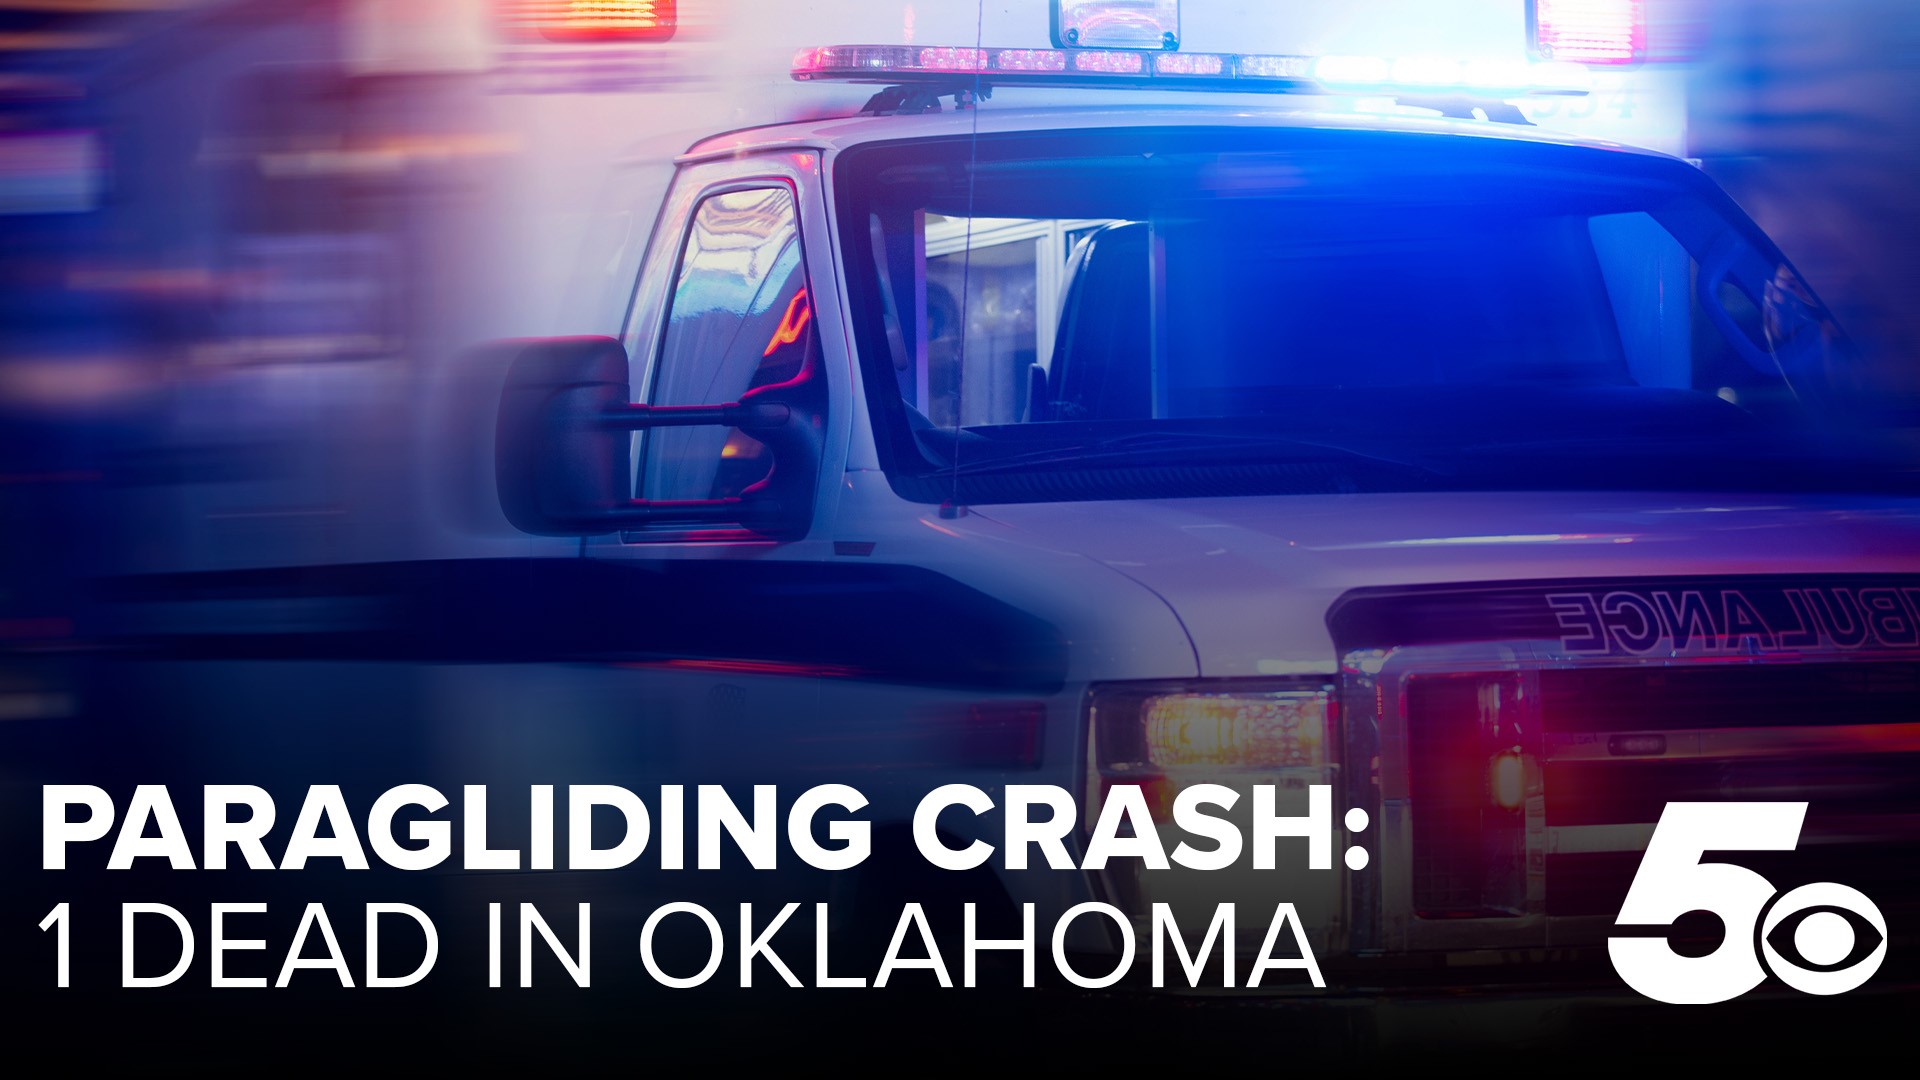 A man is dead after a paragliding incident that took place in LeFlore County on Thursday, Aug. 17, according to the Oklahoma Highway Patrol.